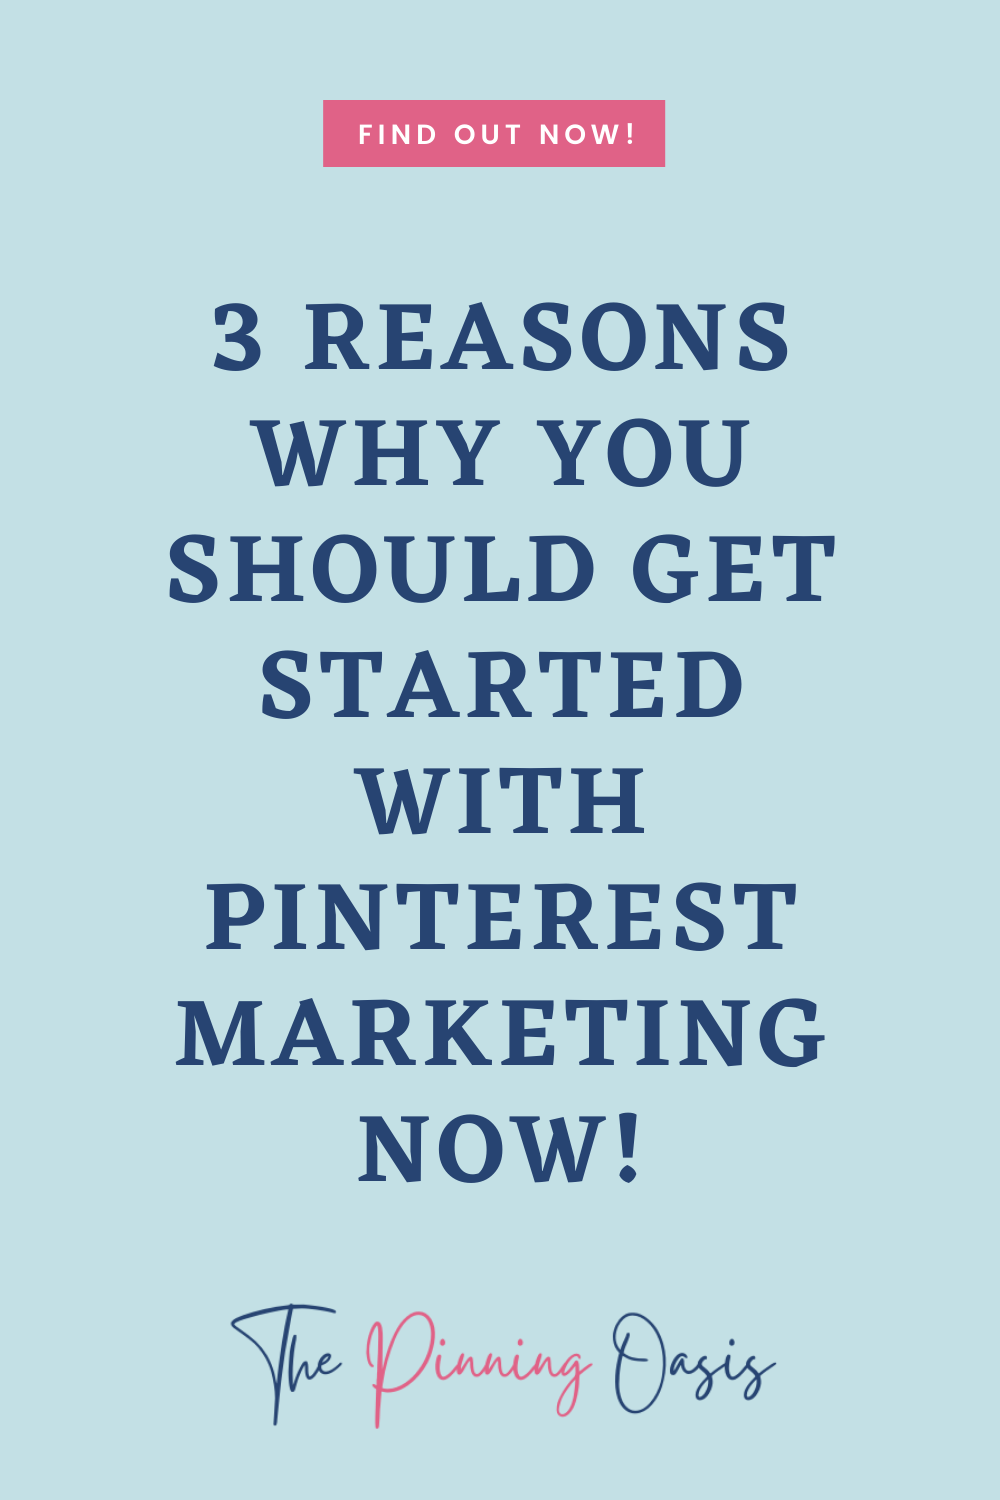 3 Ways Pinterest Marketing Can Help Your Business Grow – The Pinning Oasis